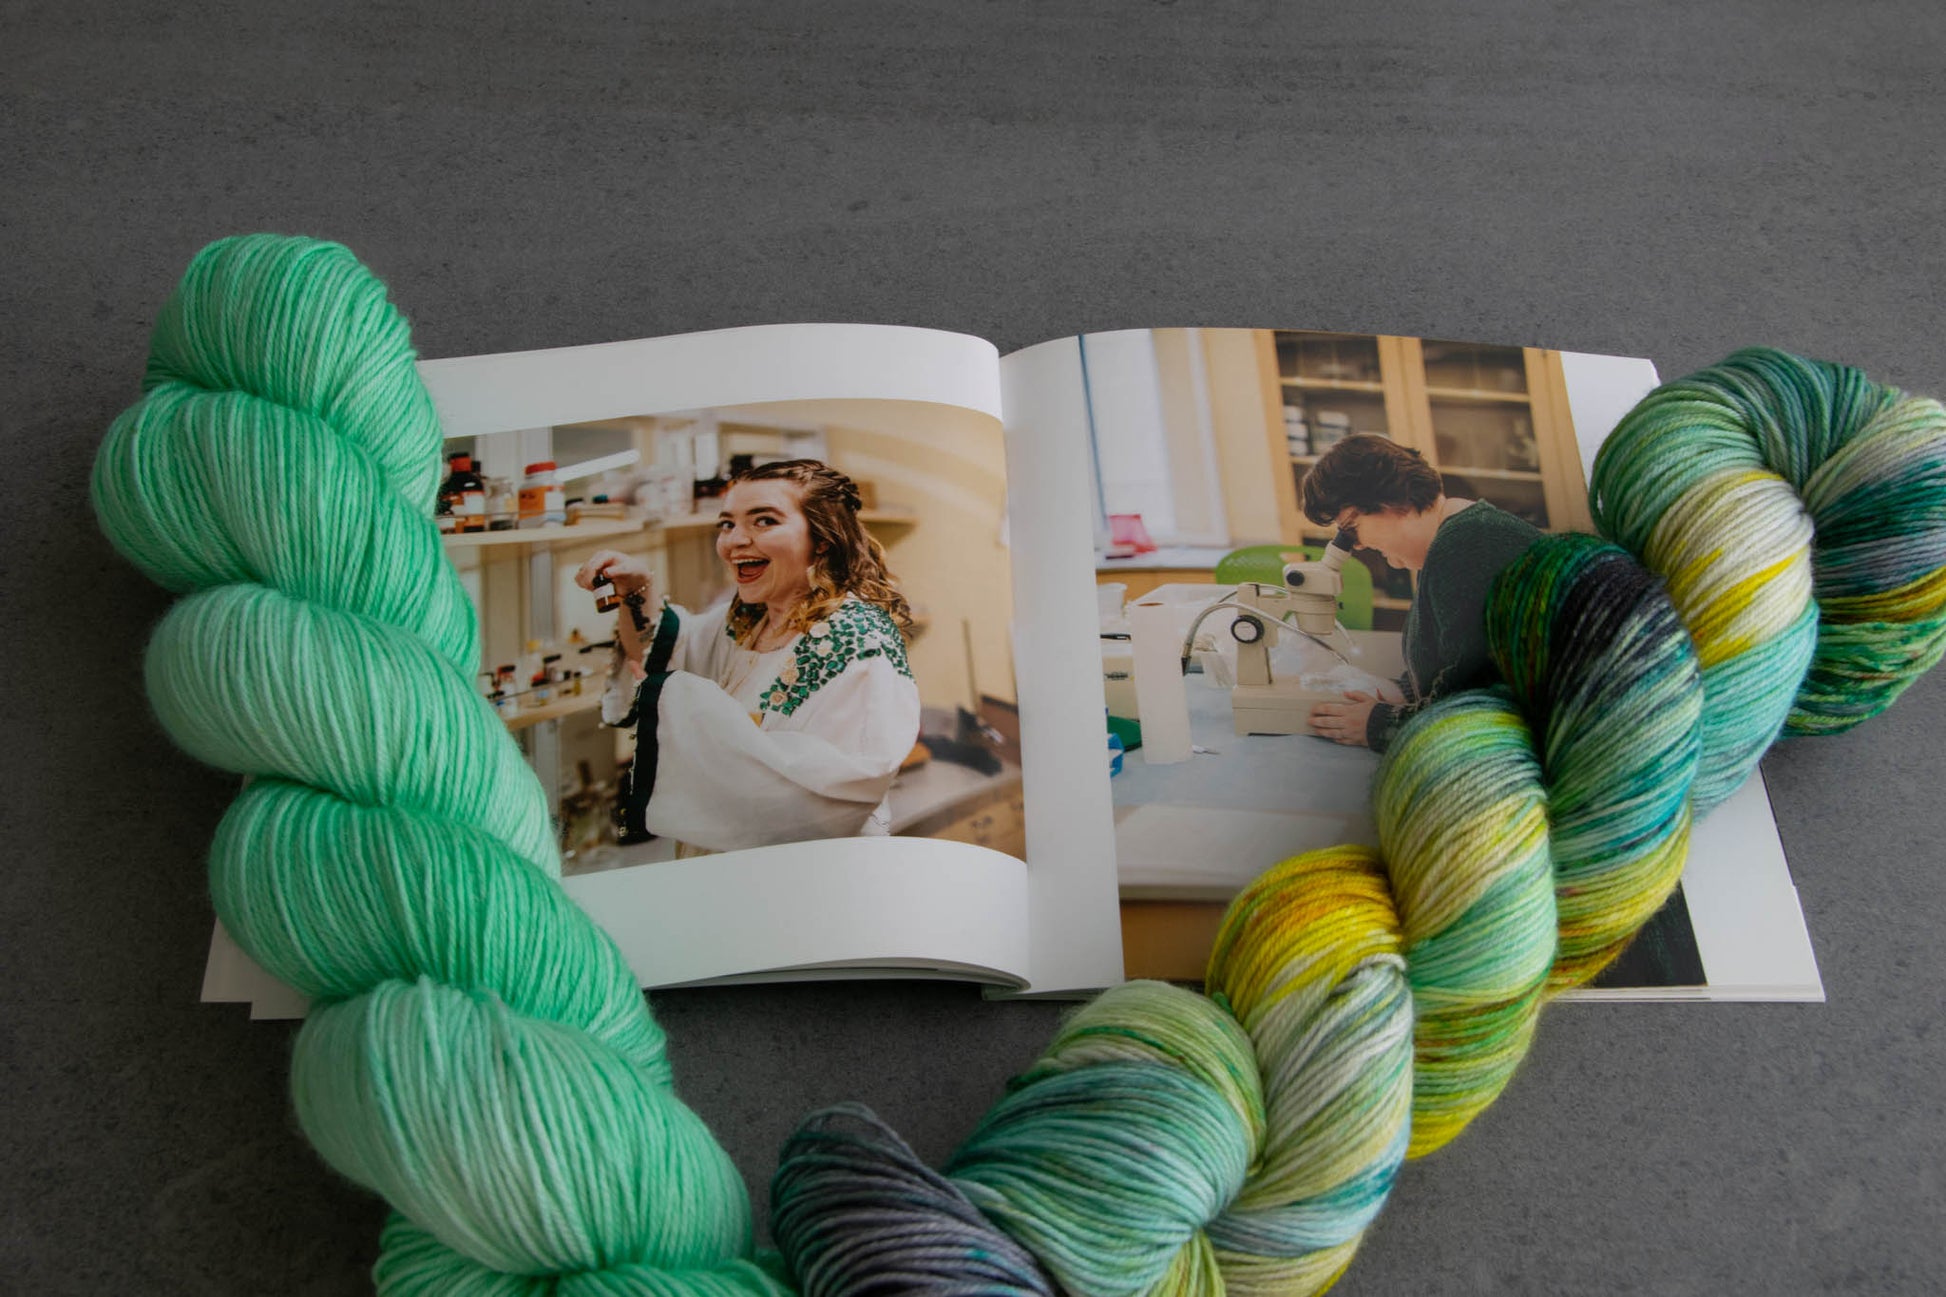 A skein of aqua Dana with its complementary aqua, yellow, green, and gray variegated colorway and graduation photos of Cat and Penny.